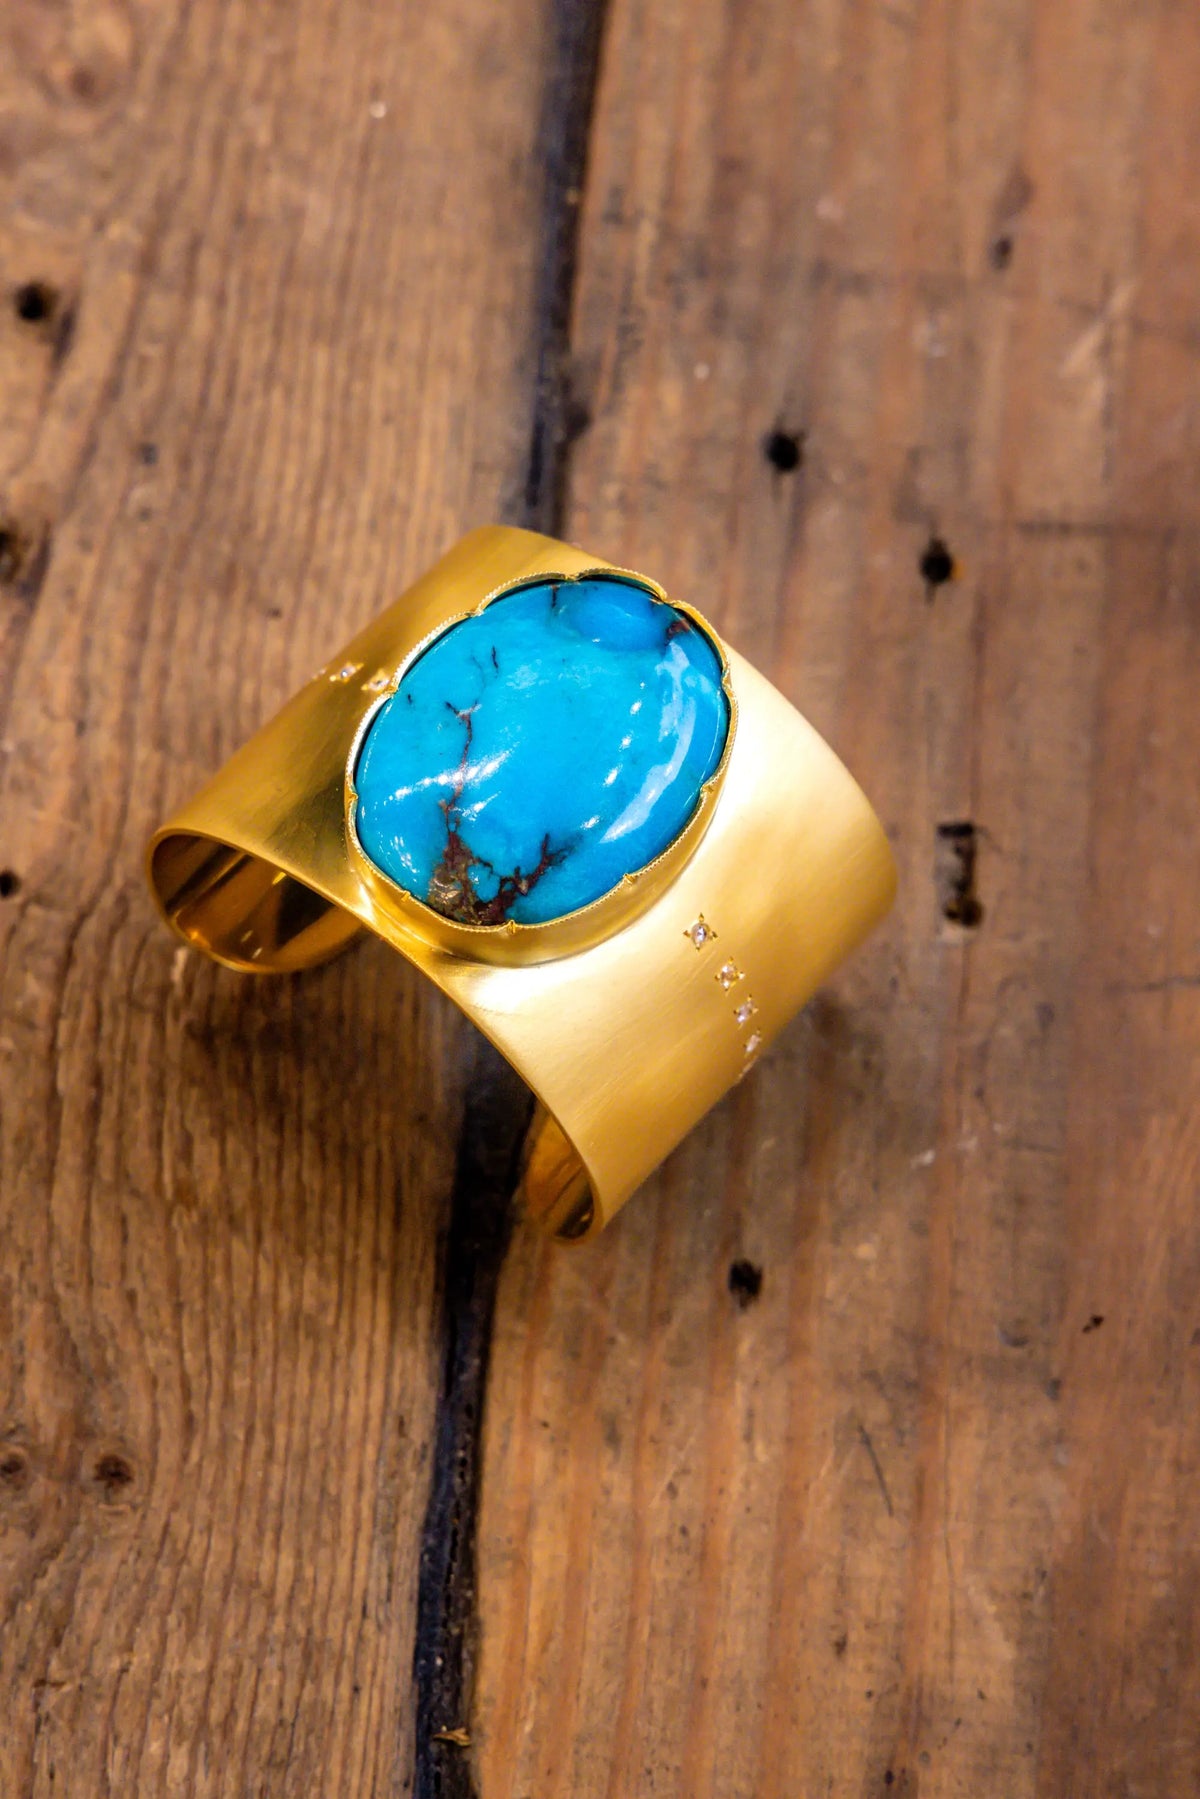 One-of-a-kind turquoise cuff - Squash Blossom Vail